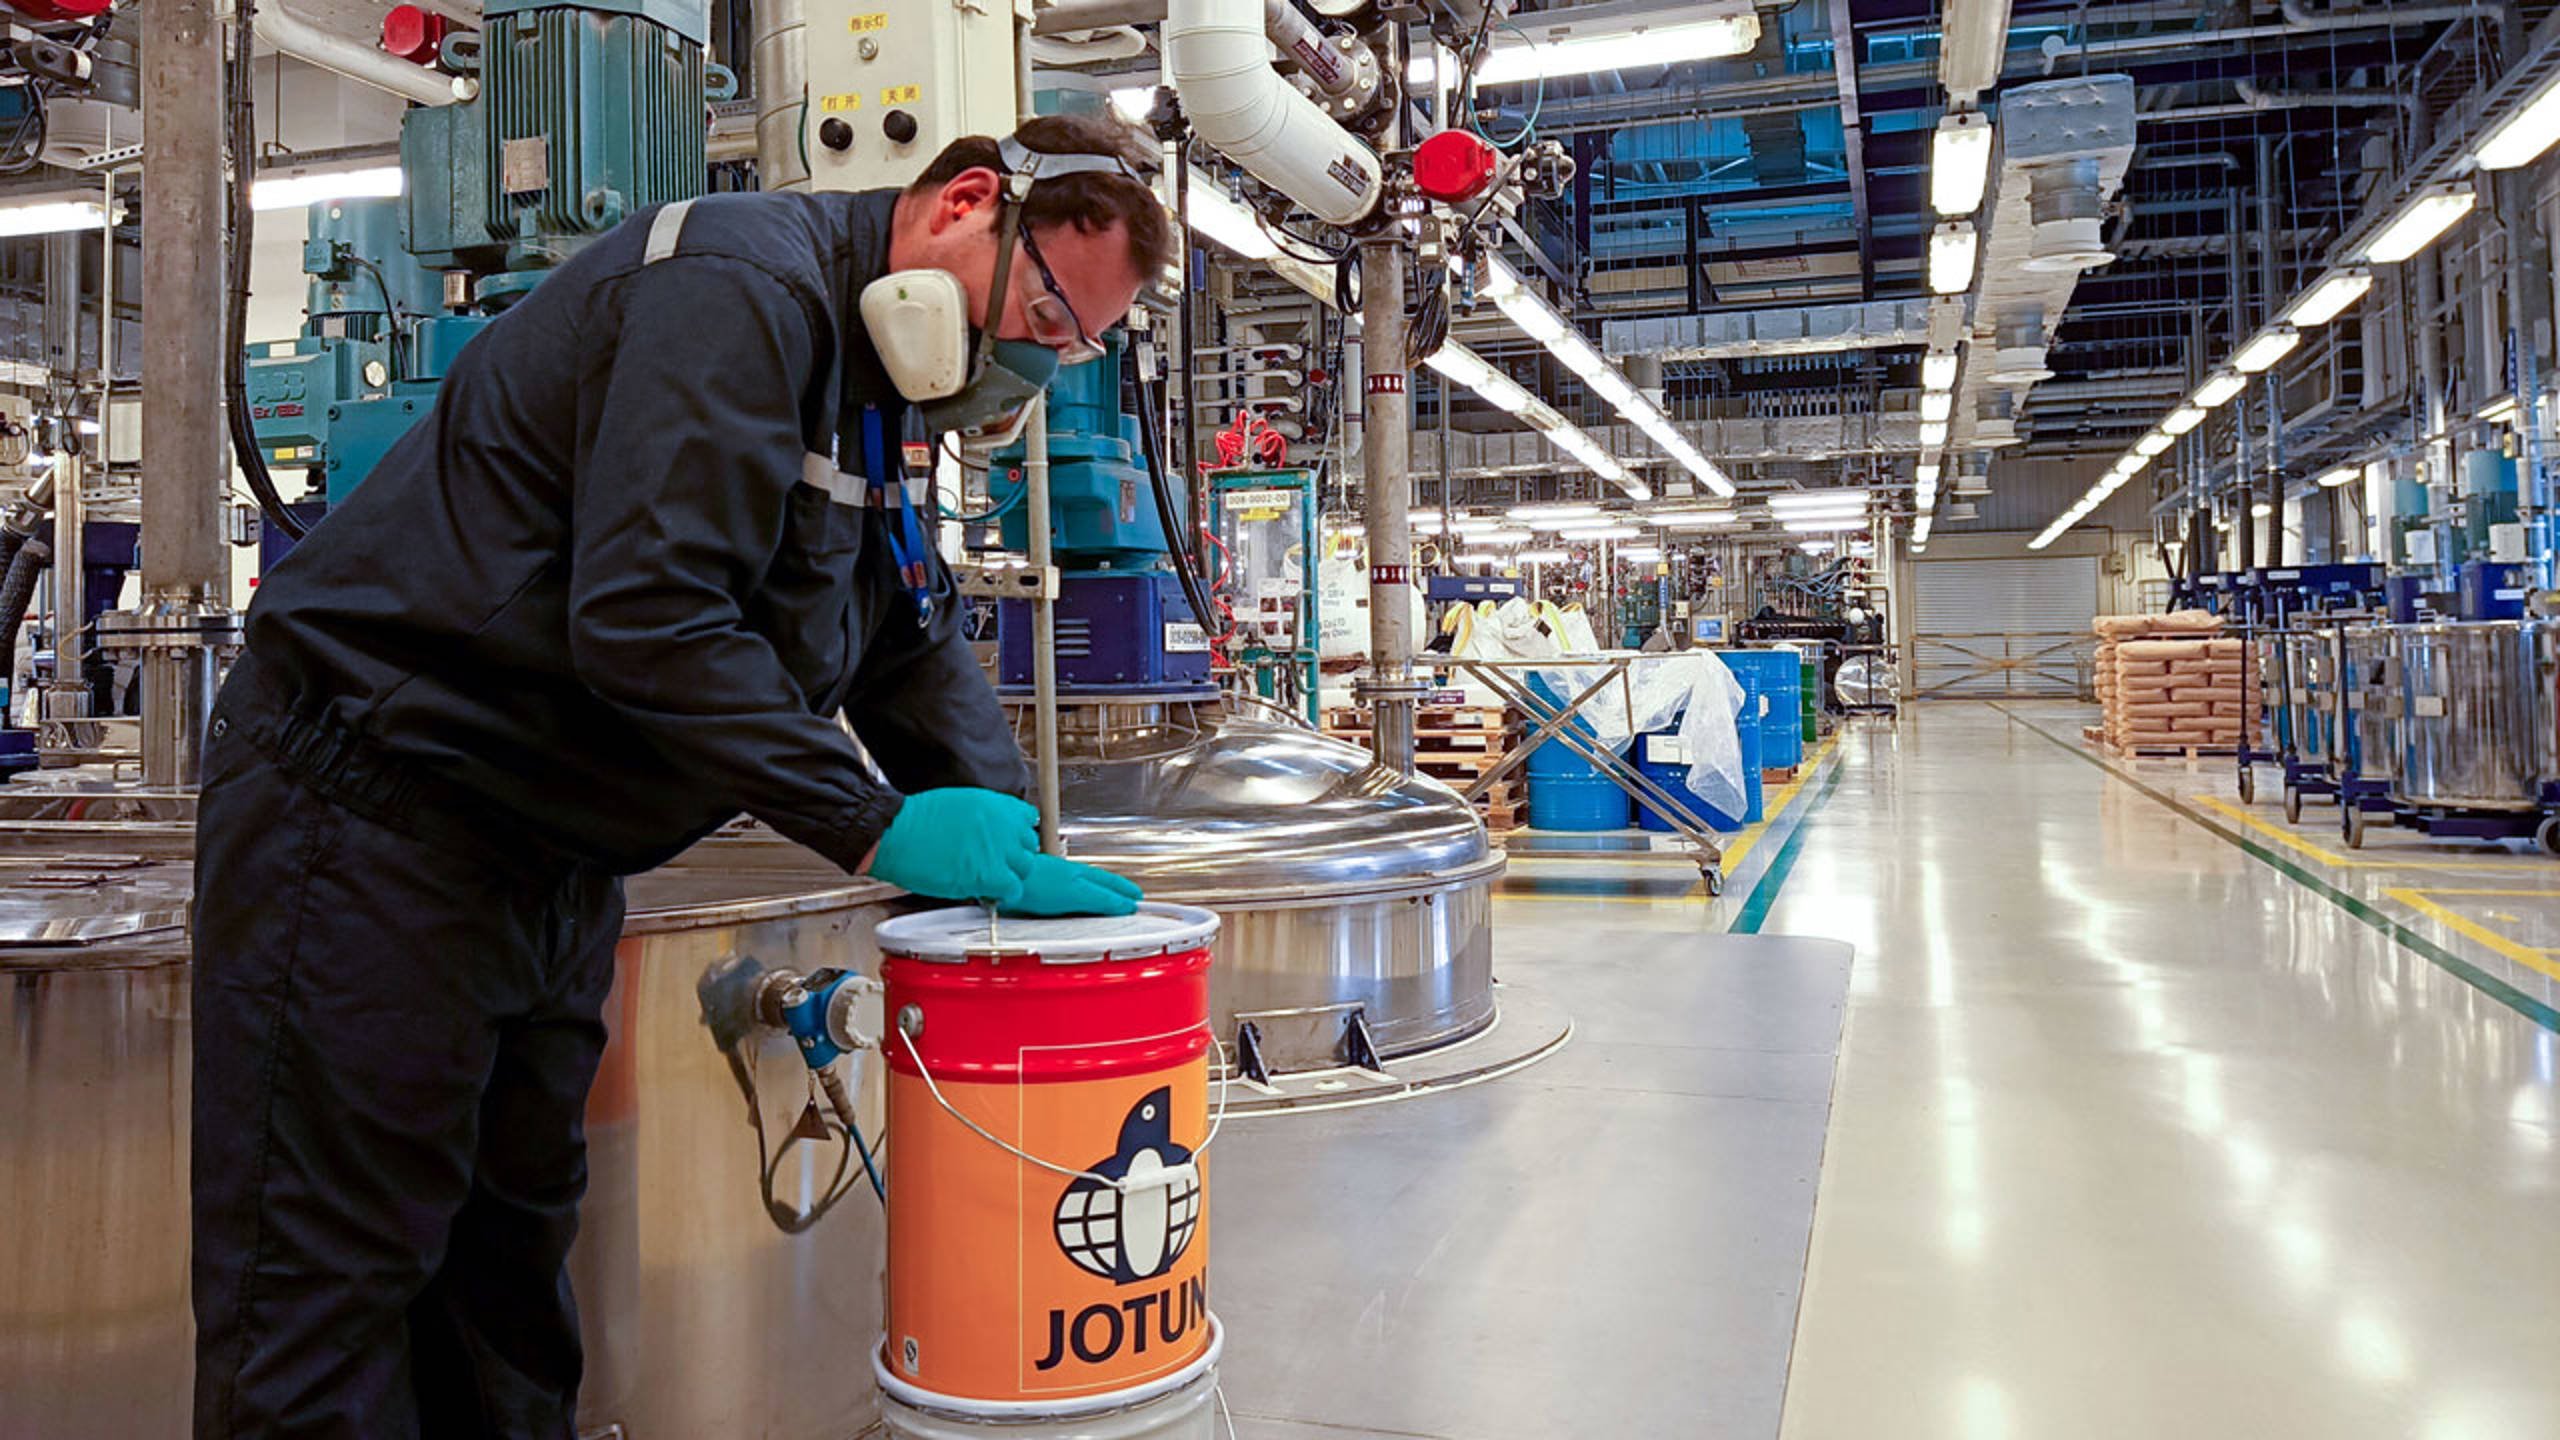 A Jotun employee working in the factory in China.